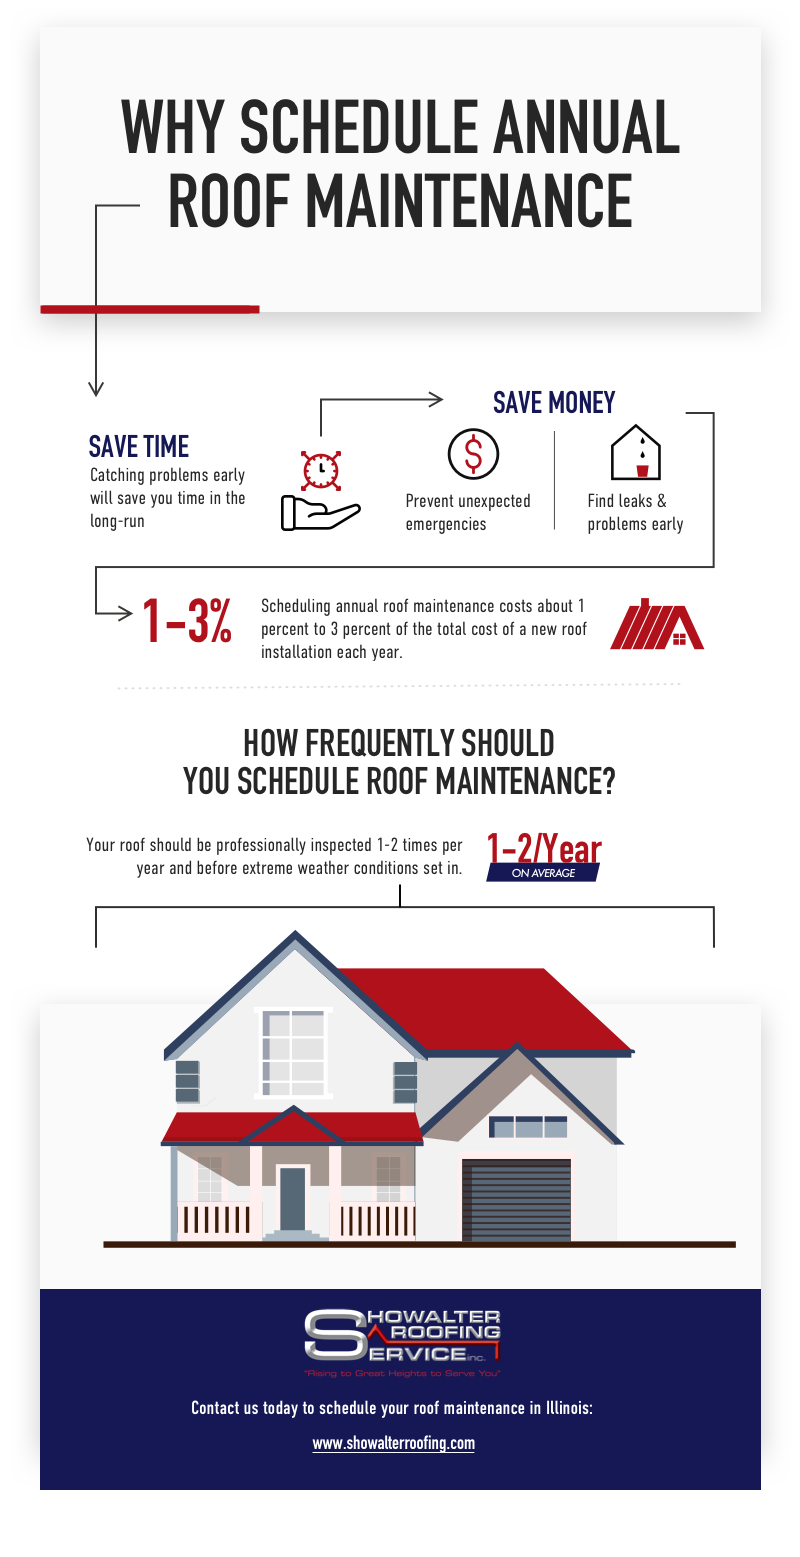 Schedule Annual Roof Maintenance